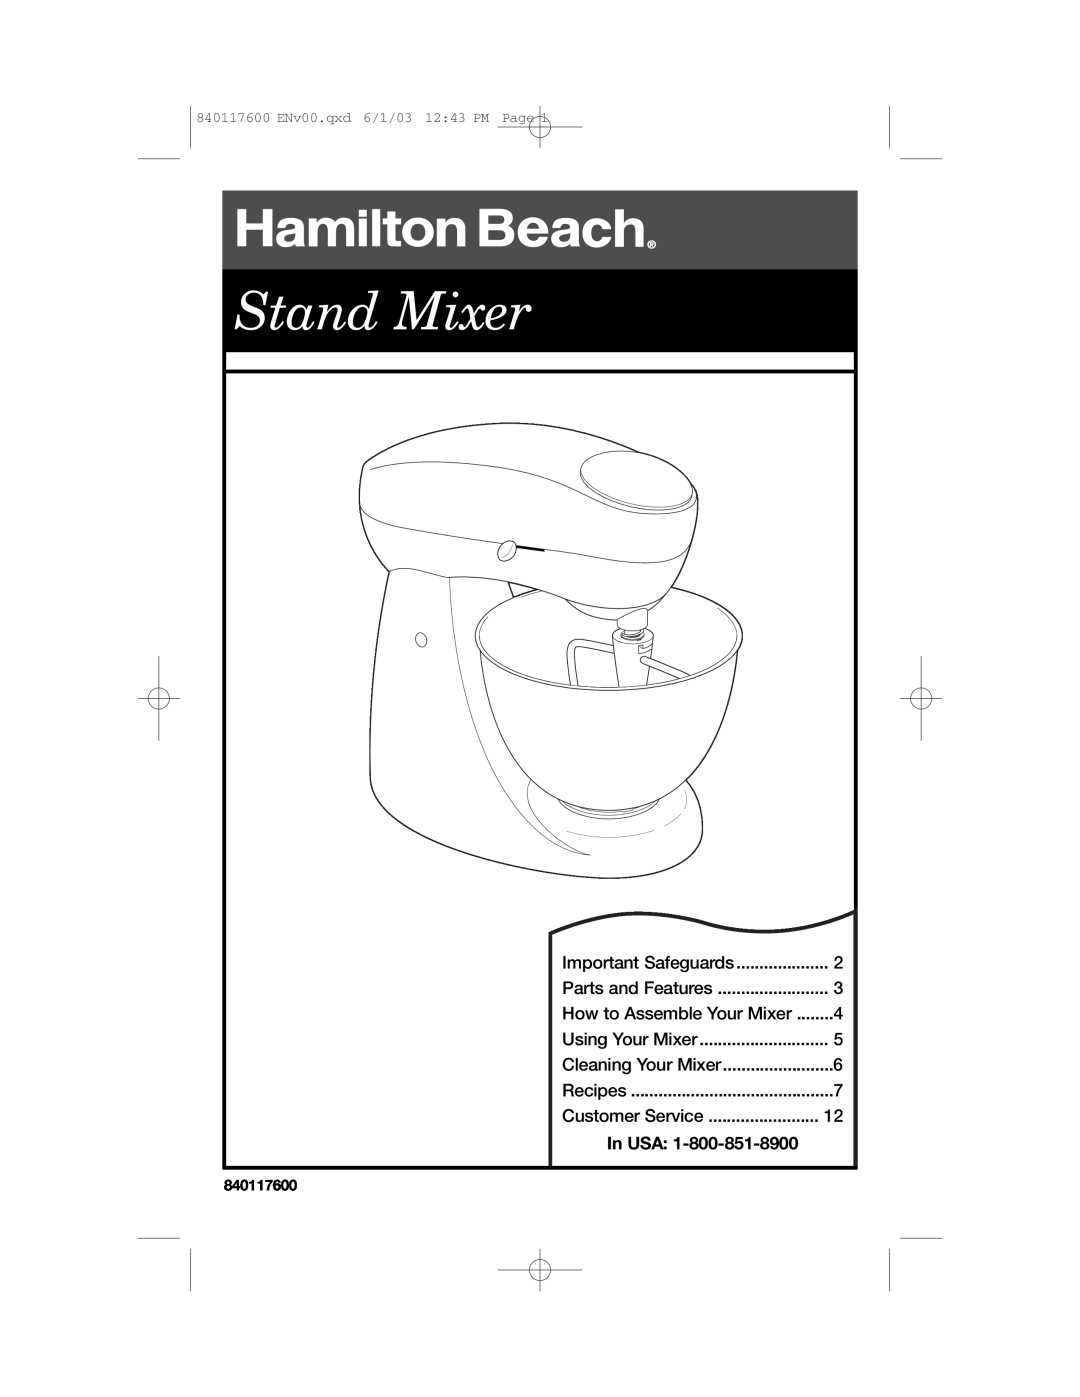 Hamilton Beach 840117600 manual Stand Mixer, In USA, Important Safeguards, Parts and Features, How to Assemble Your Mixer 